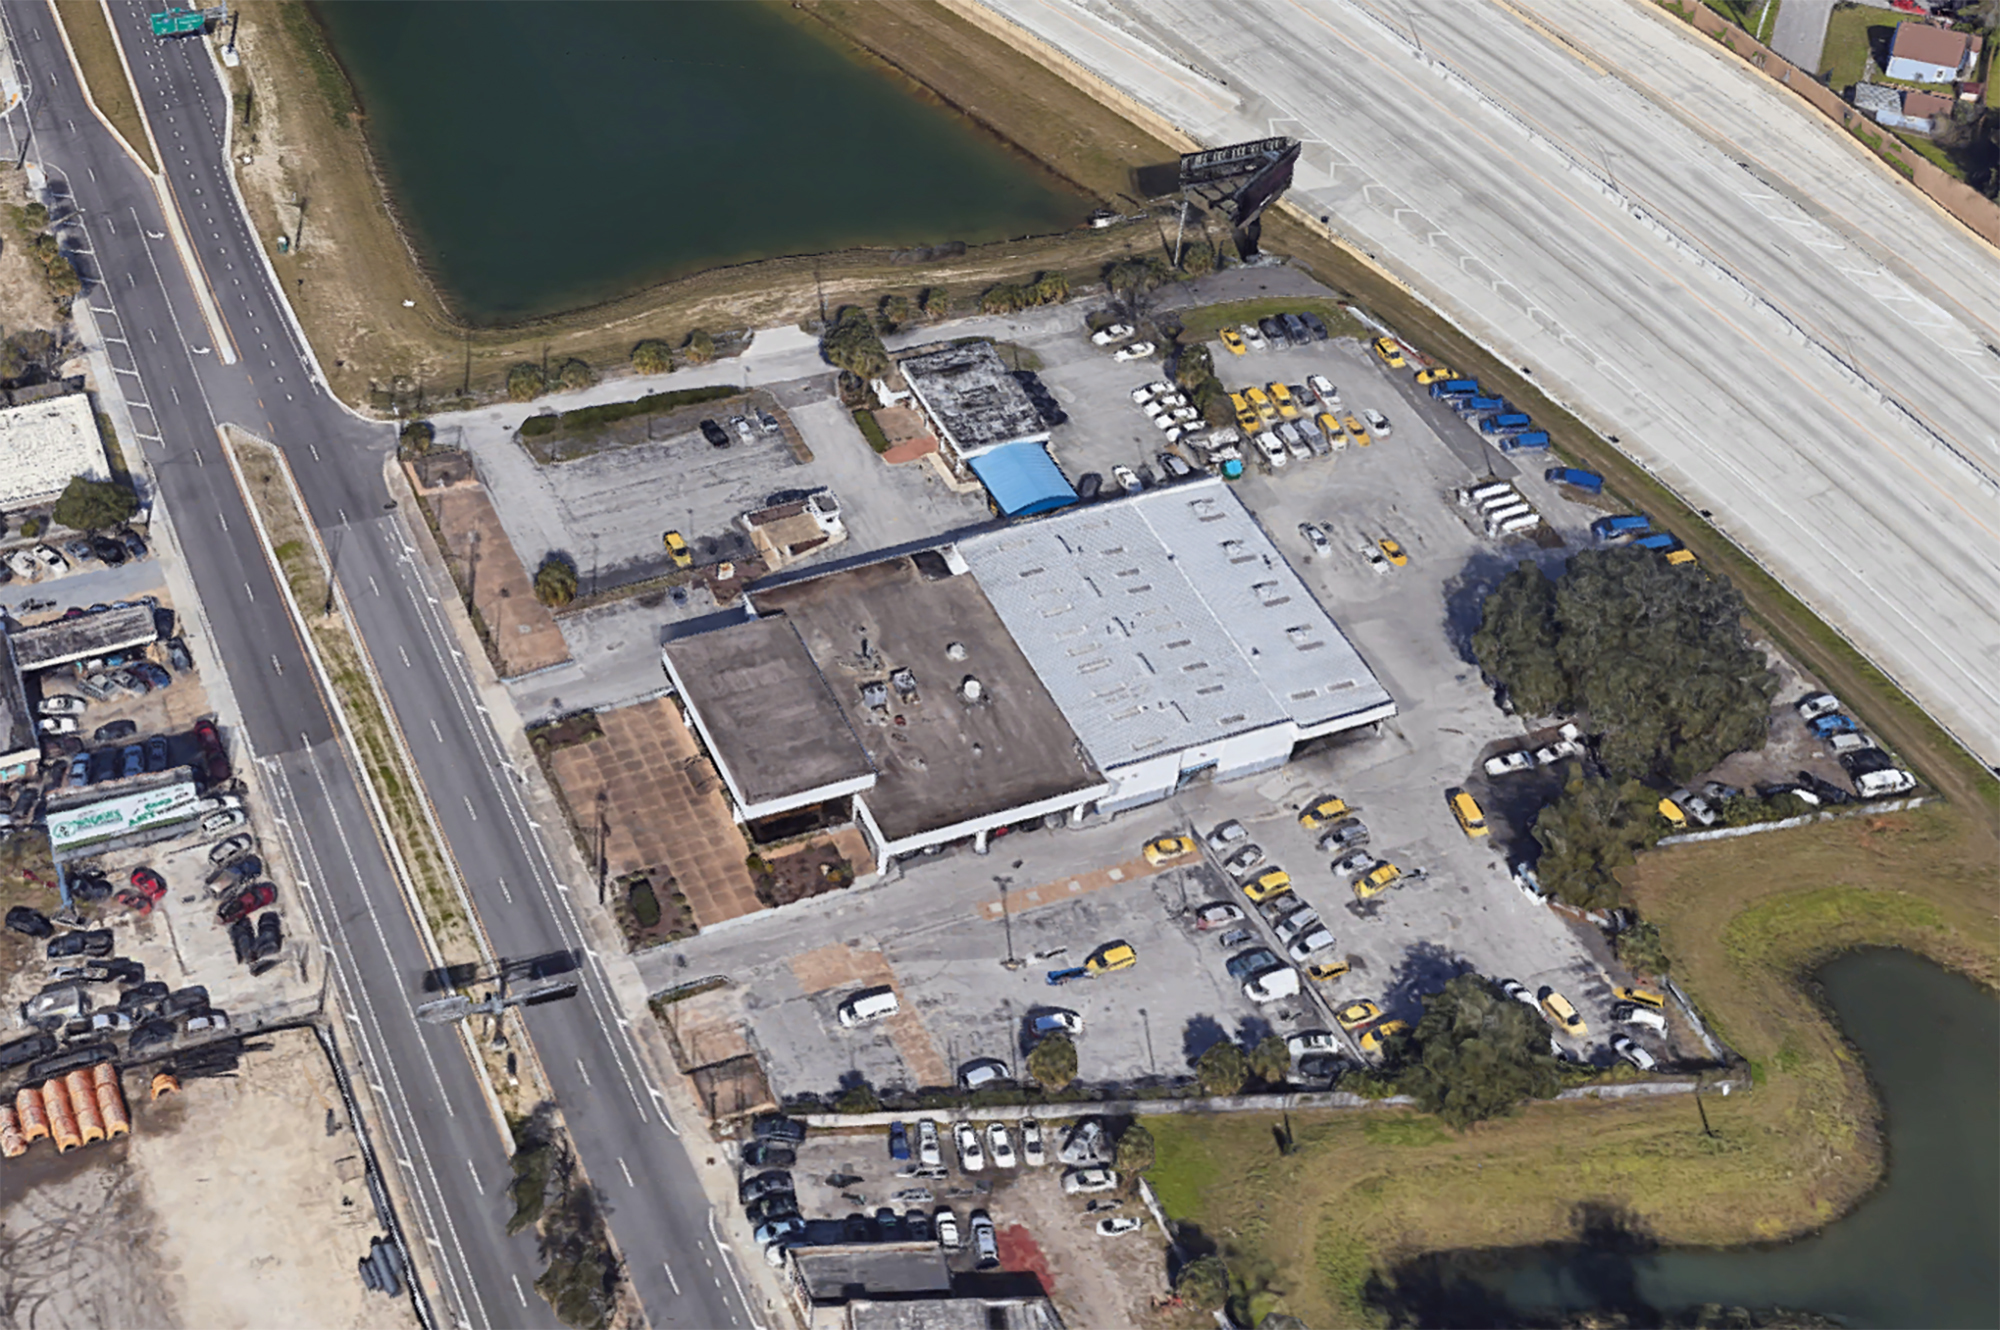 Briggs bought the 3.4-acre property and 15,547-square-foot building at 2525 Philips Highway and 2111 York St. from O’Steen Volvo Land LLC for $4.2 million. (Google)